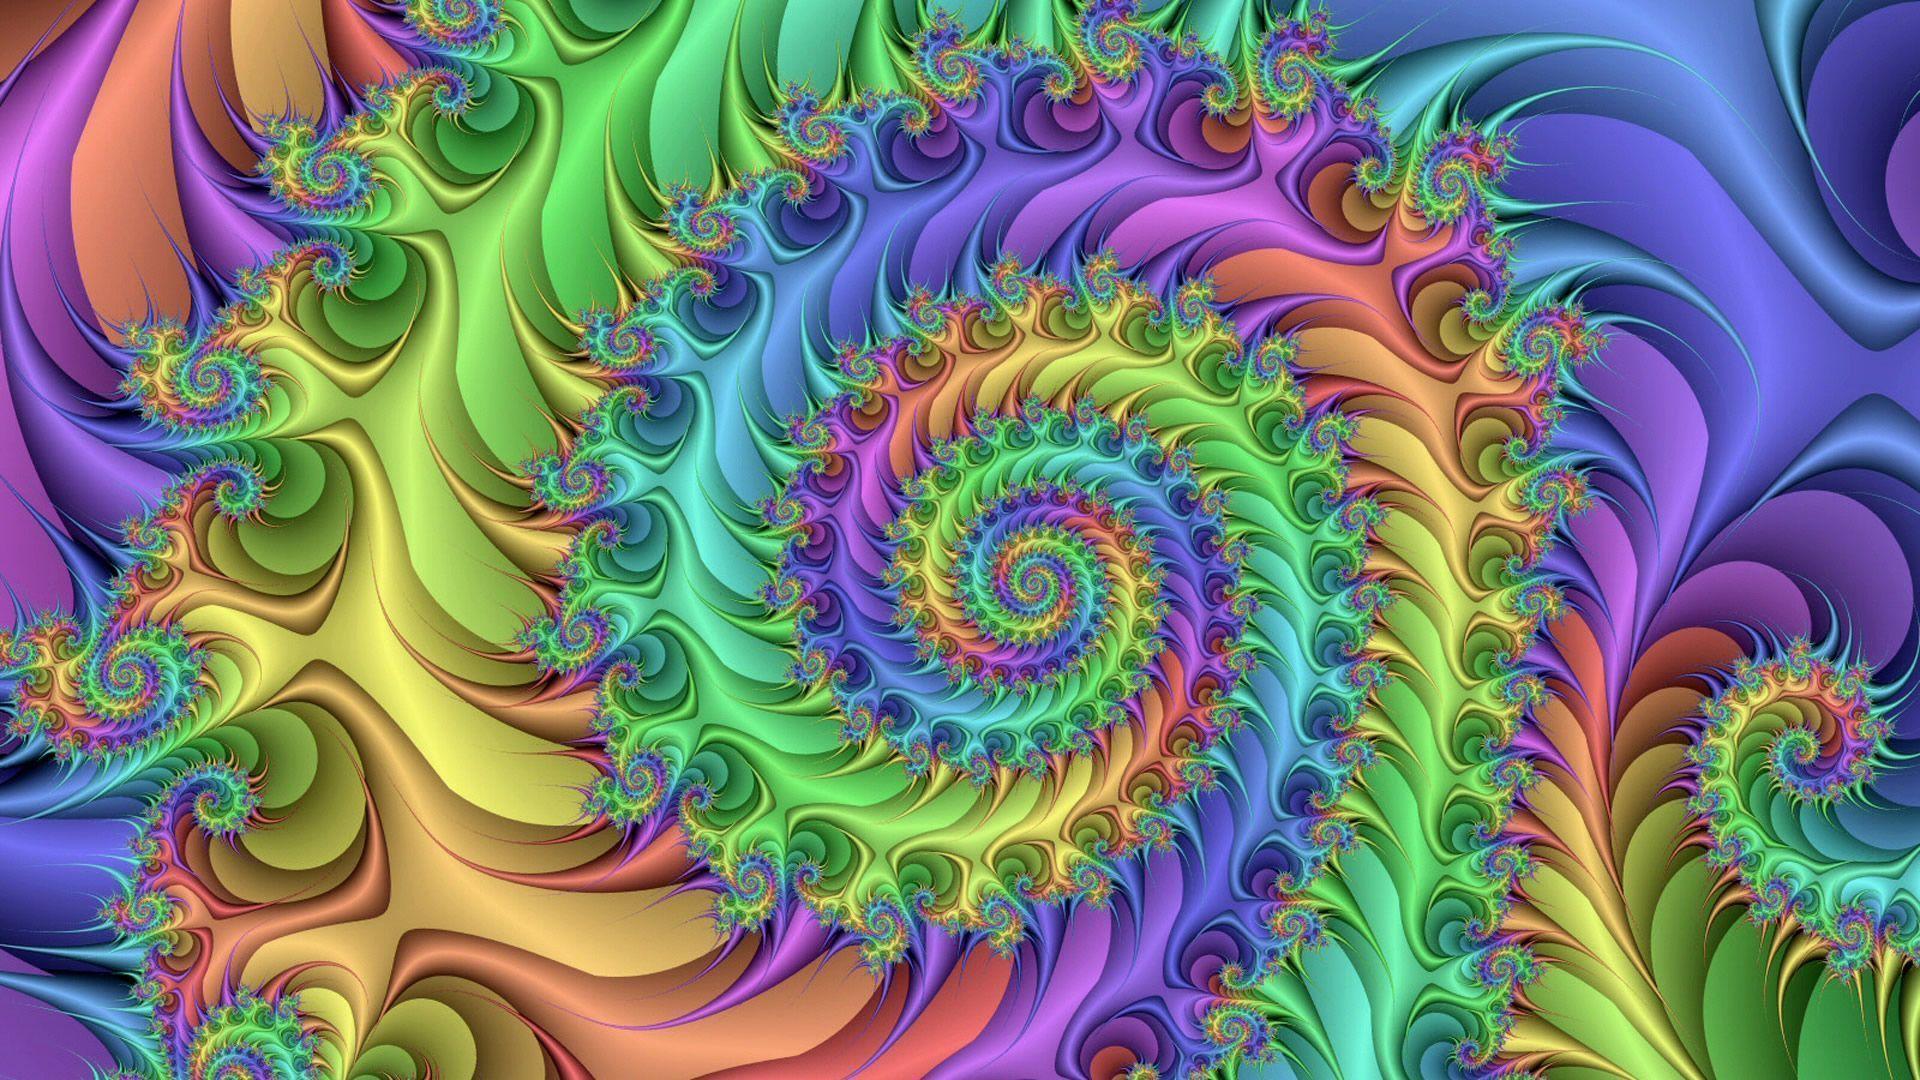 Trippy Swirl, Trippy Background and Wallpaper